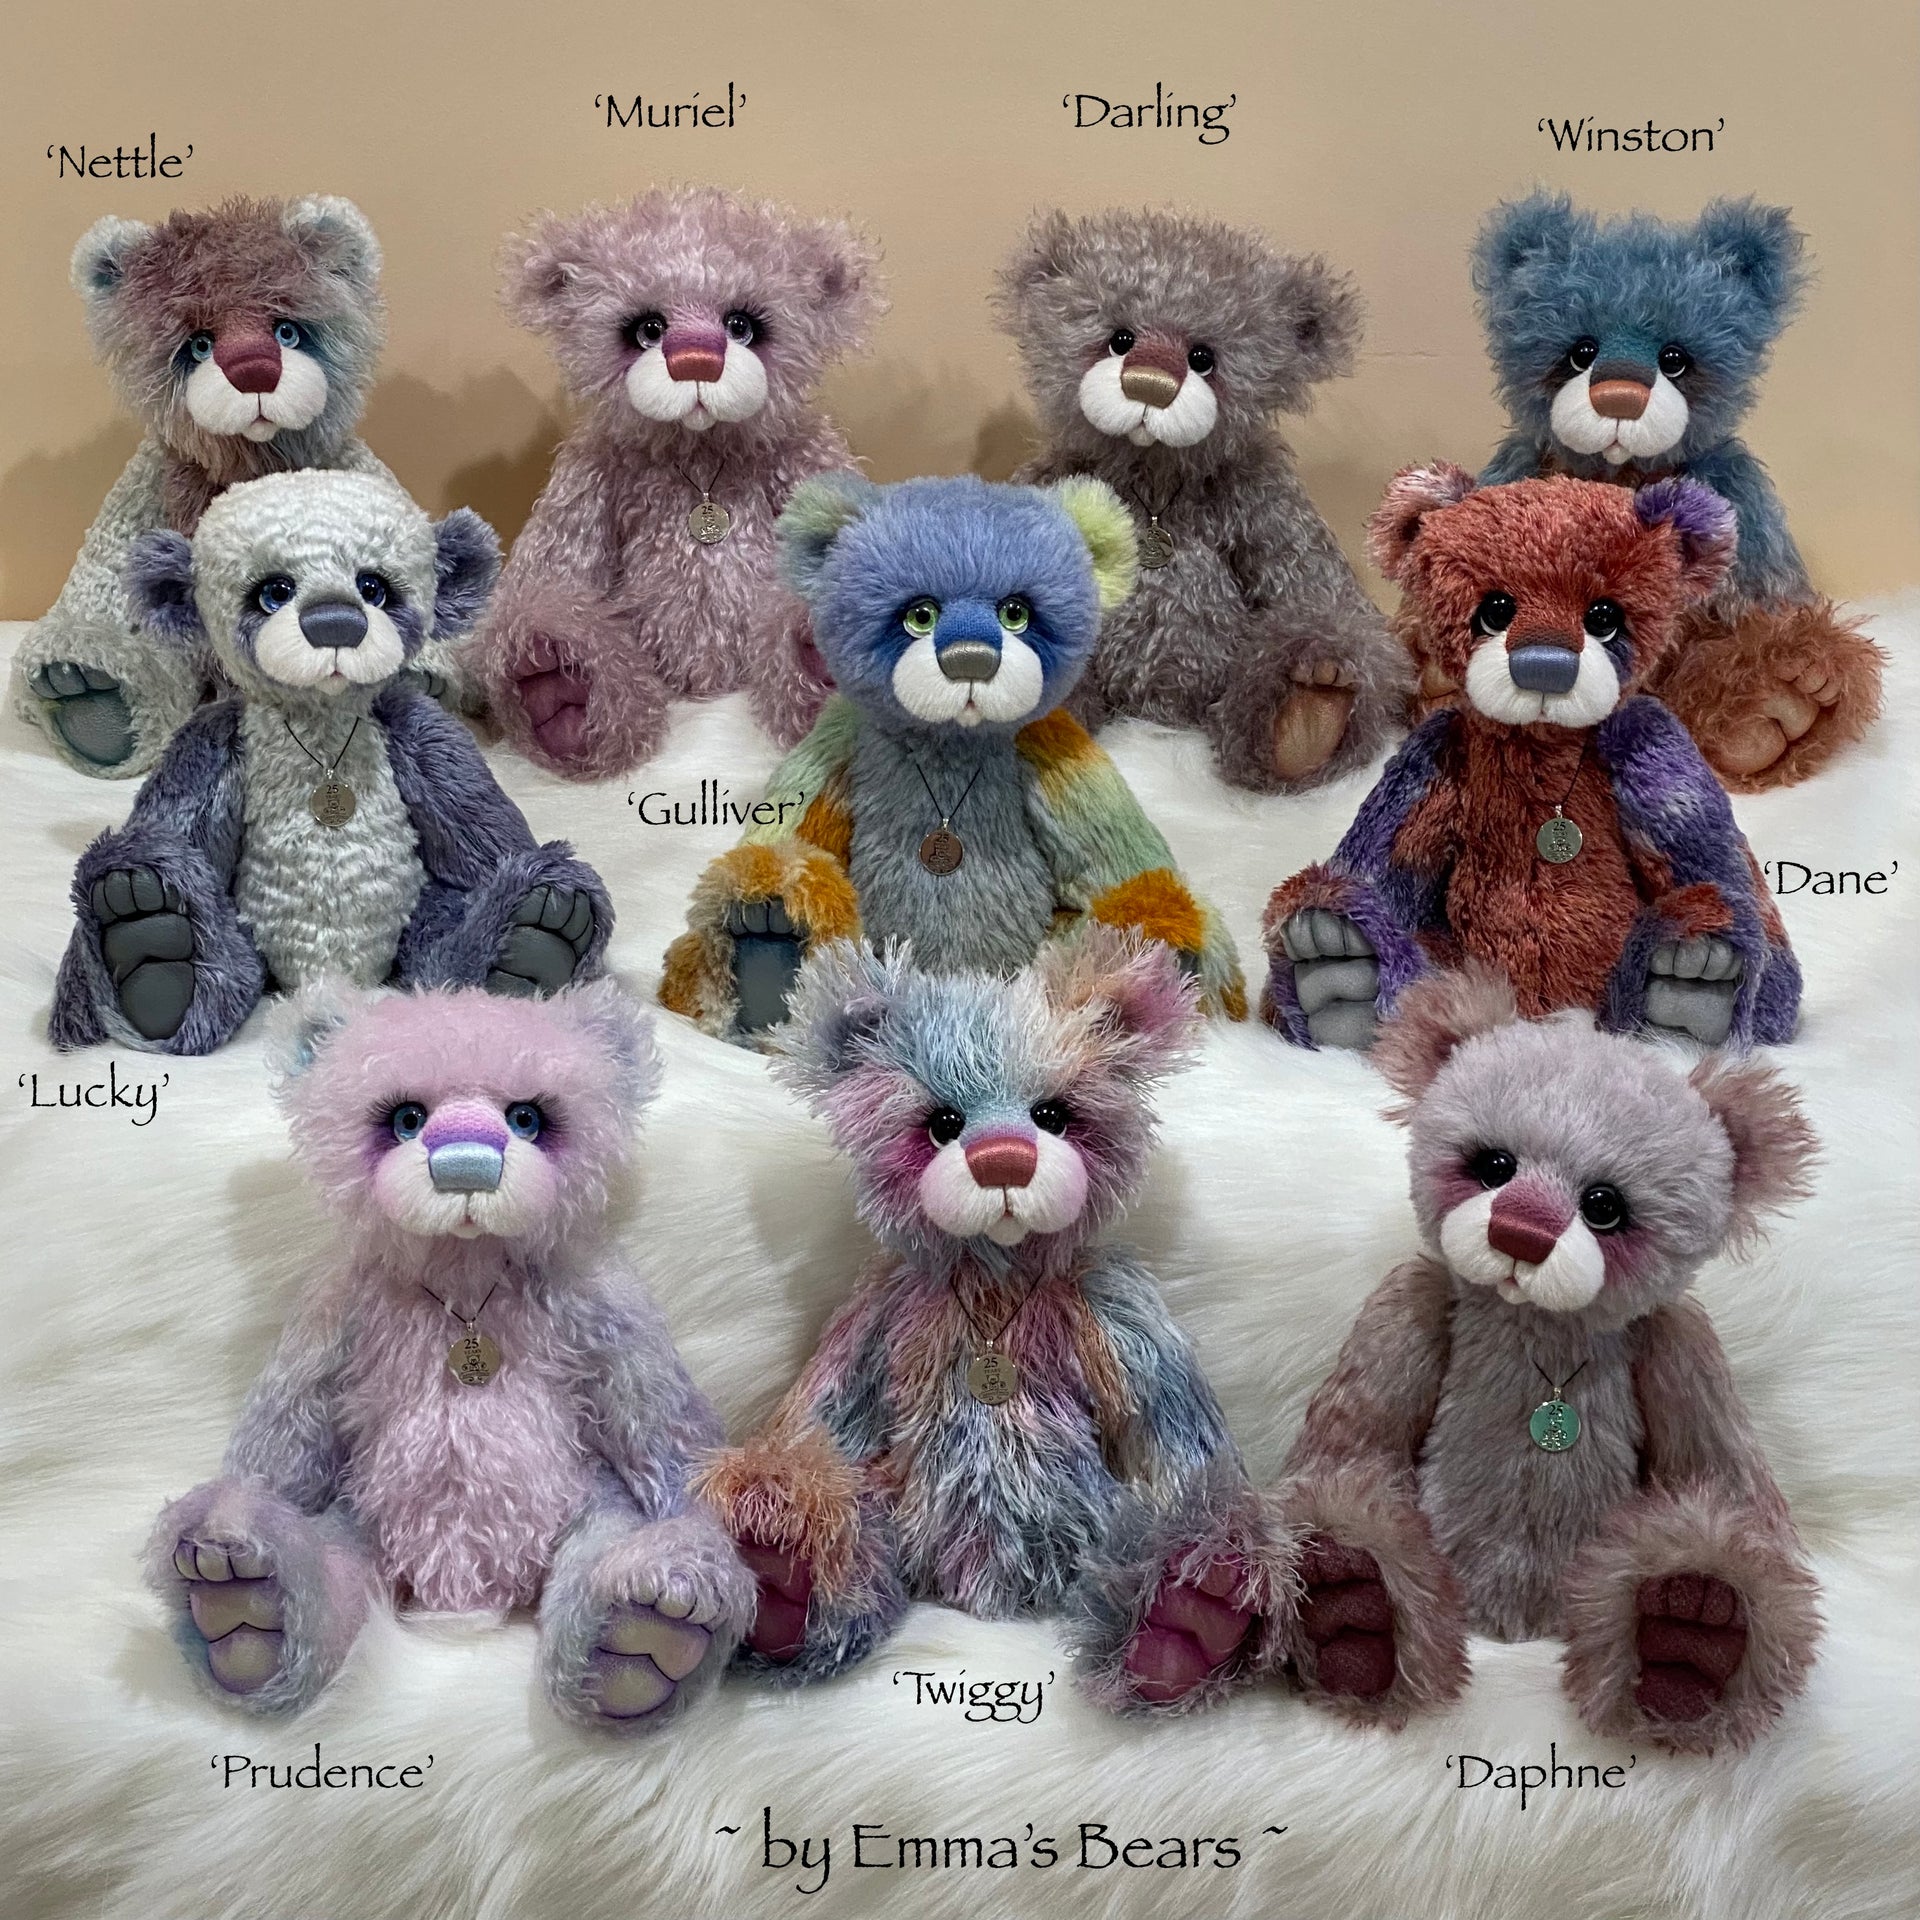 Daphne - 16" SPECIAL 25th Anniversary Collection Hand-dyed mohair Artist Bear by Emmas Bears - OOAK